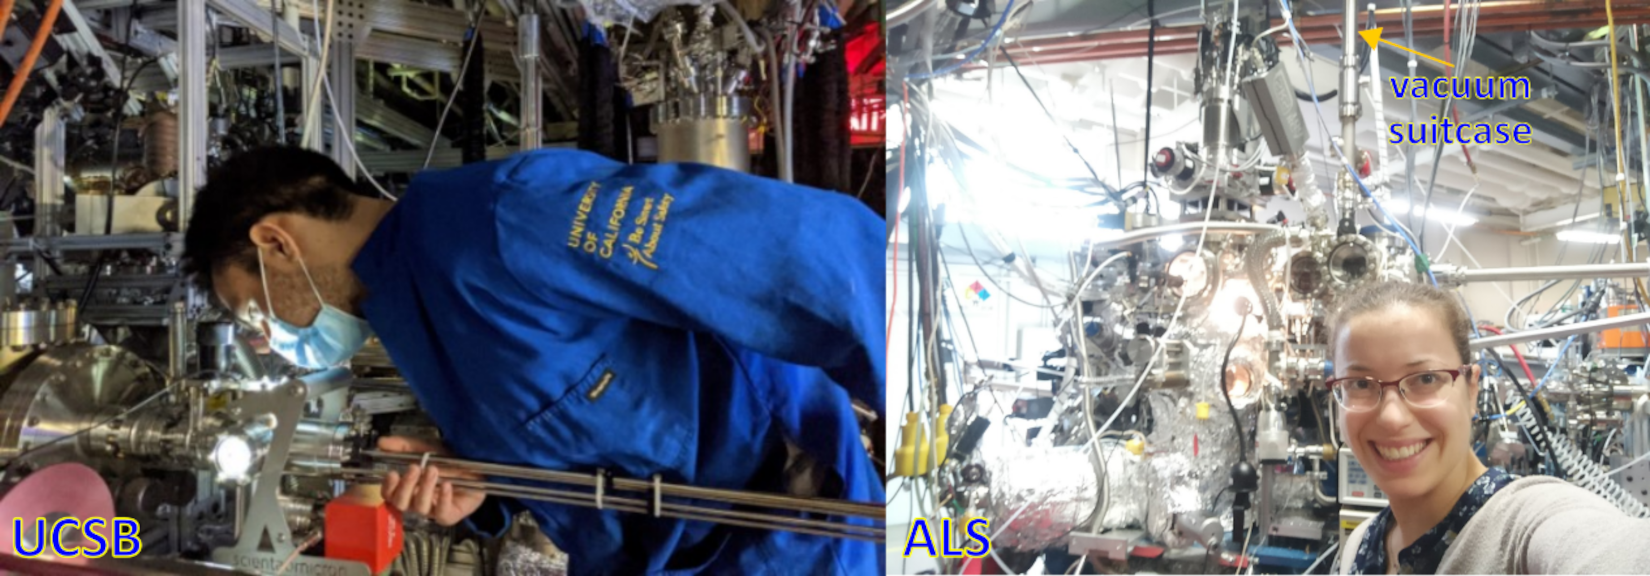 Figure 1. Left: Aaron Engel transferring samples into the vacuum suitcase at UCSB. Right: Hadass Inbar and the vacuum suitcase at ALS after a successful beamtime experiment!